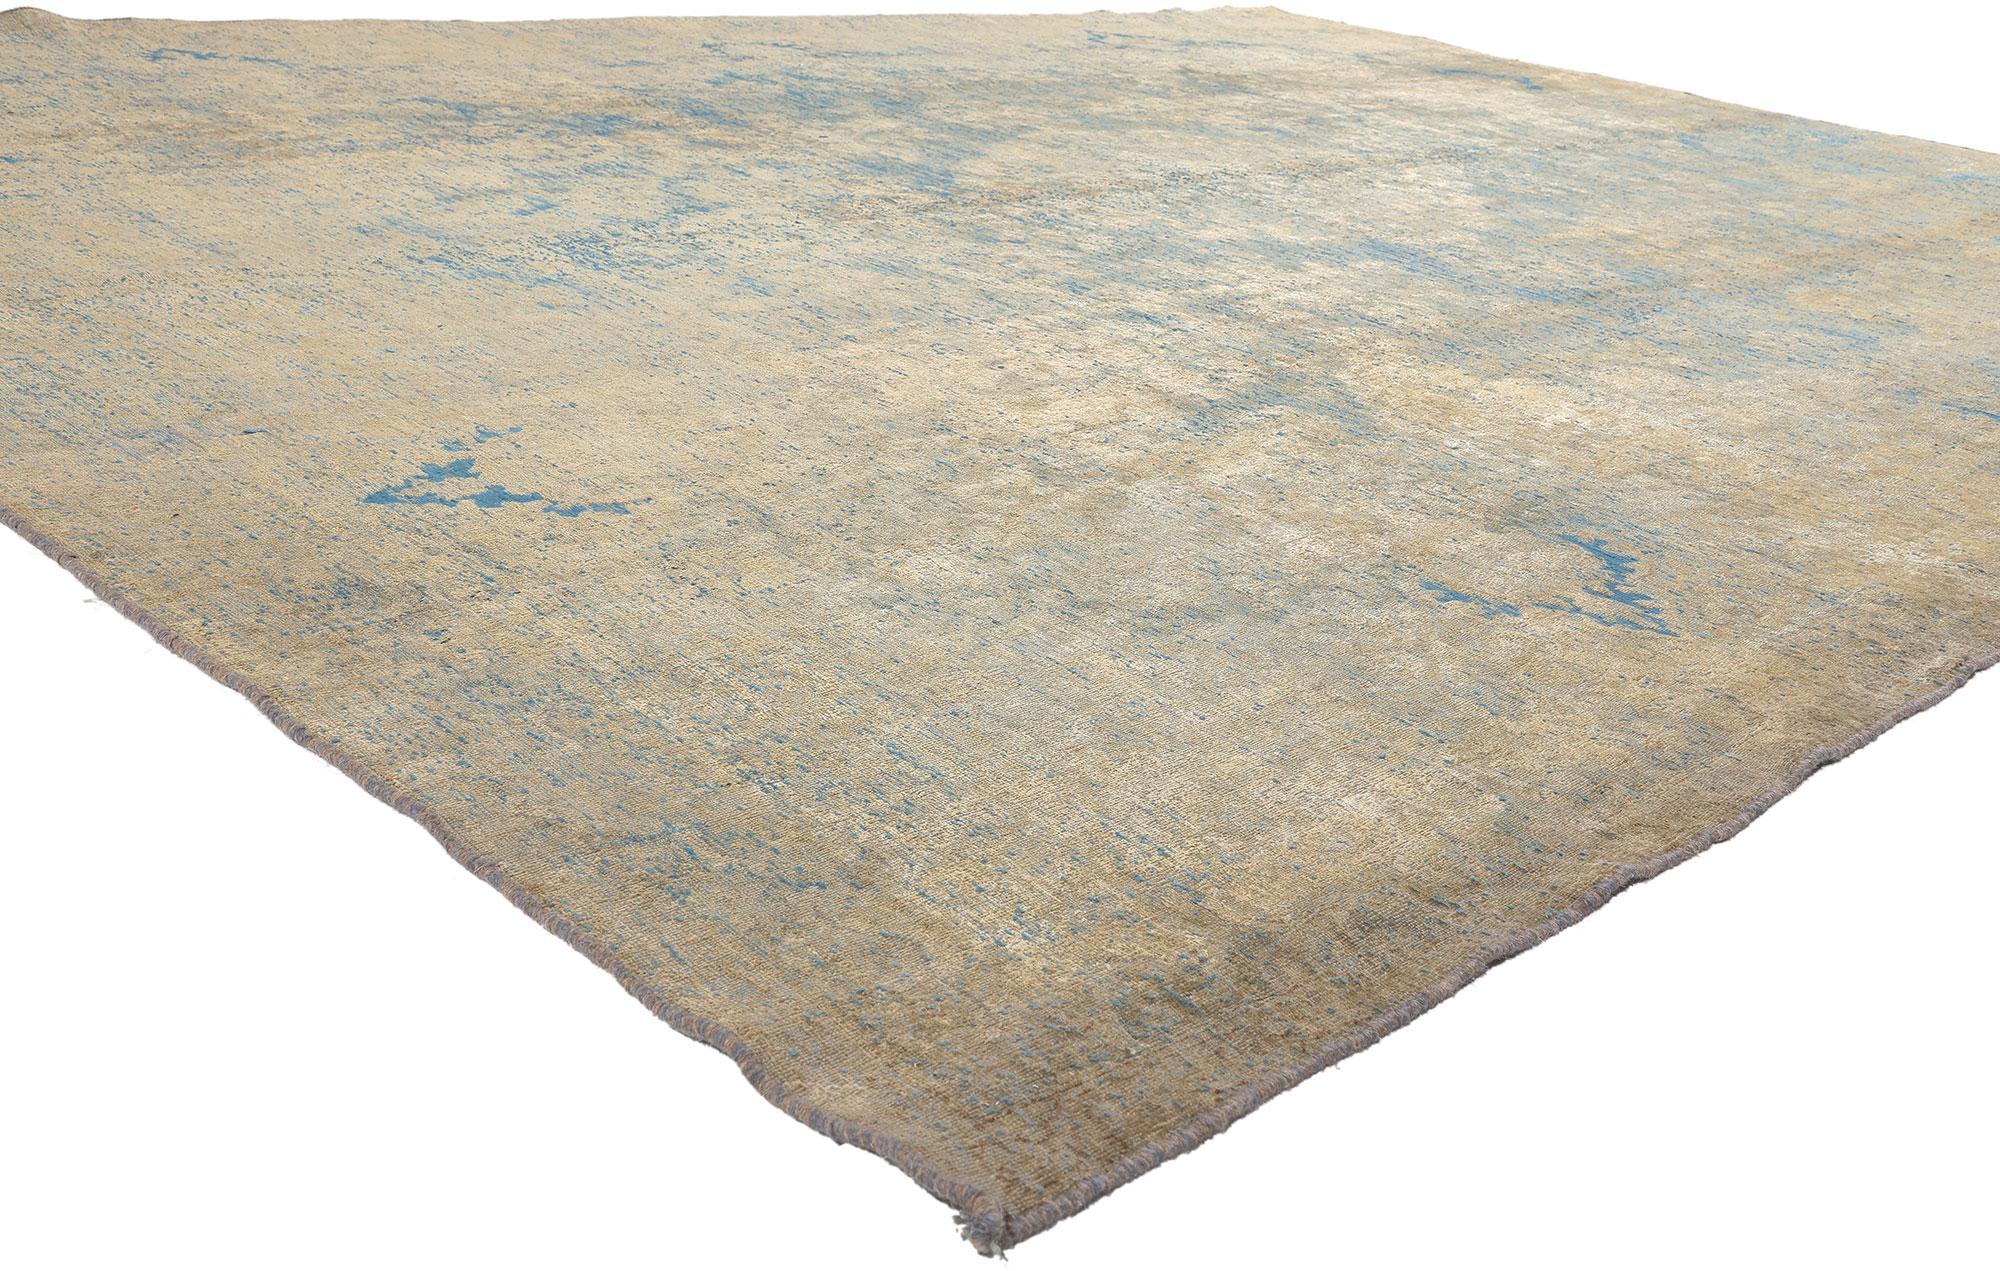 60786 Vintage Turkish Overdyed Rug, 09'08 x 13'02.
Balancing a timeless design with a romantic rustic sensibility, this hand knotted wool distressed vintage Turkish overdyed rug beautifully embodies French Provincial and Colonial Revival style. A